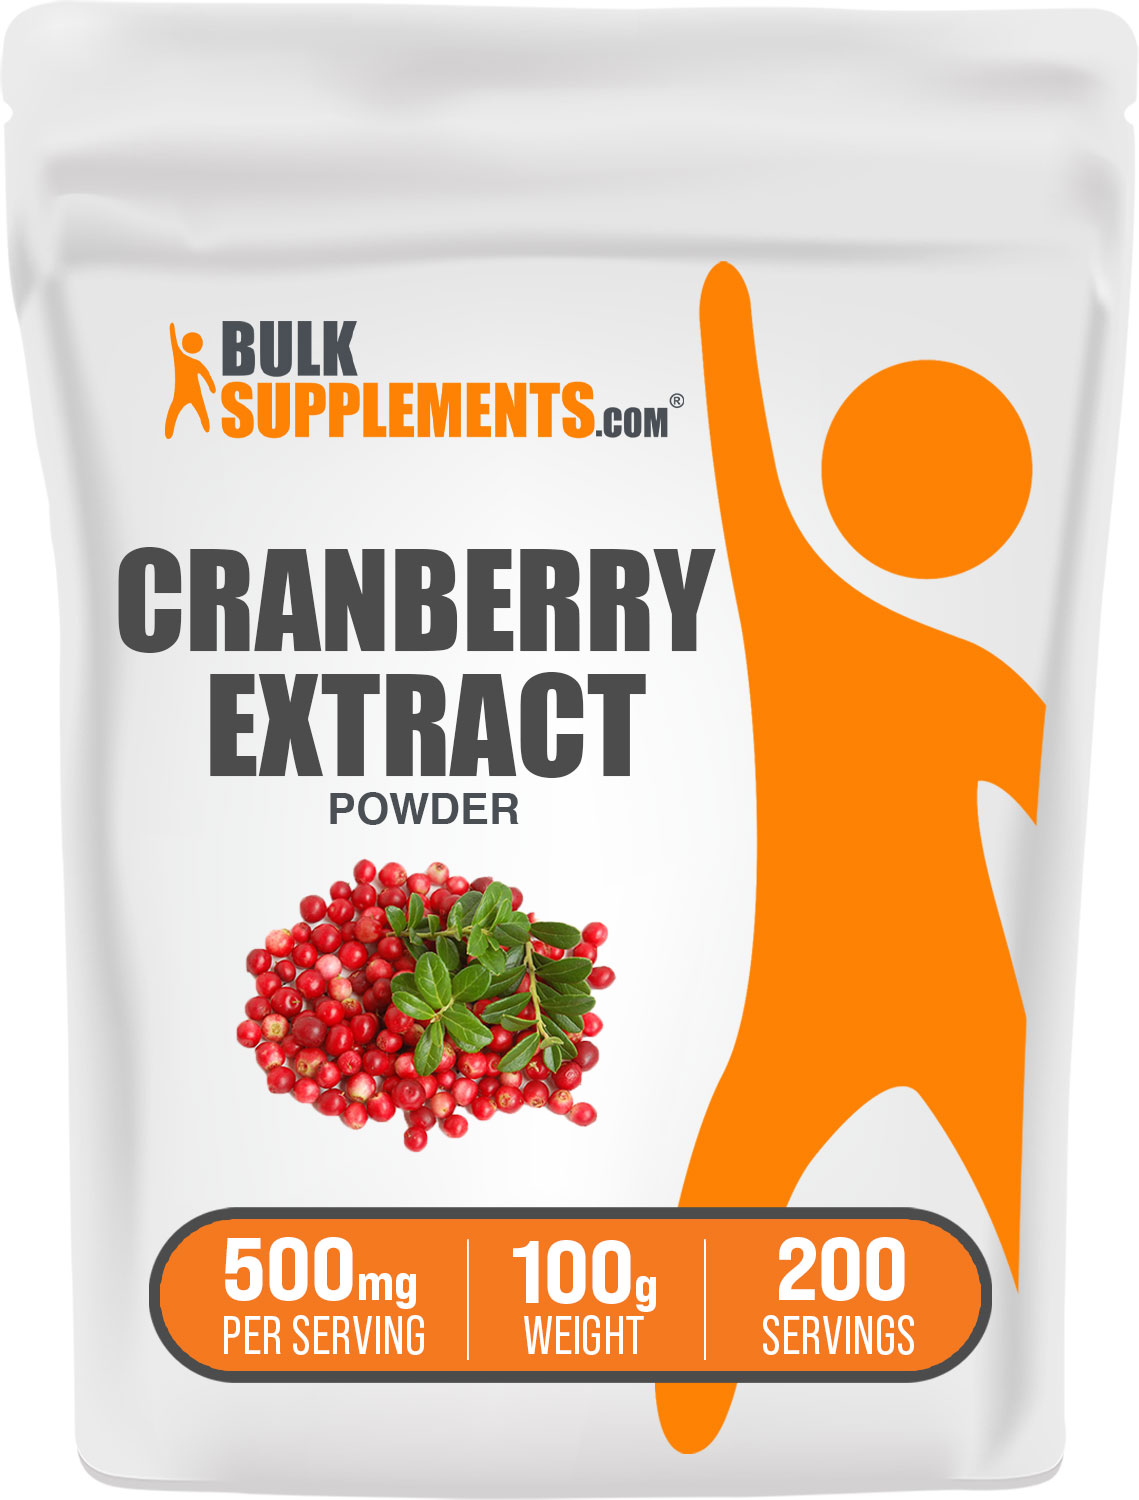 BulkSupplements.com Cranberry Extract Powder - Cranberry Supplements - Urinary Tract Support (100 Grams - 3.5 oz) - image 1 of 6